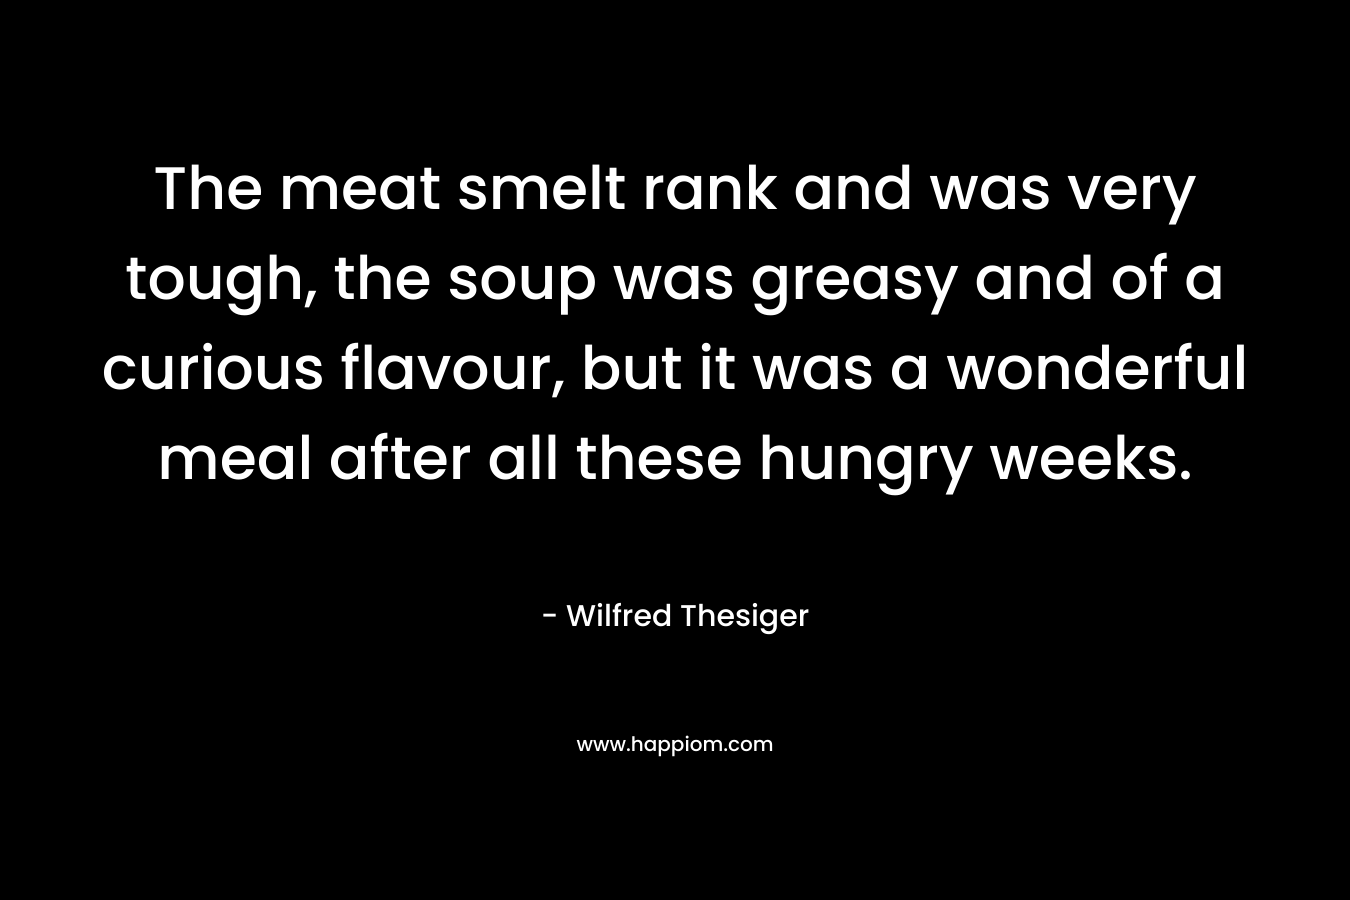 The meat smelt rank and was very tough, the soup was greasy and of a curious flavour, but it was a wonderful meal after all these hungry weeks. – Wilfred Thesiger